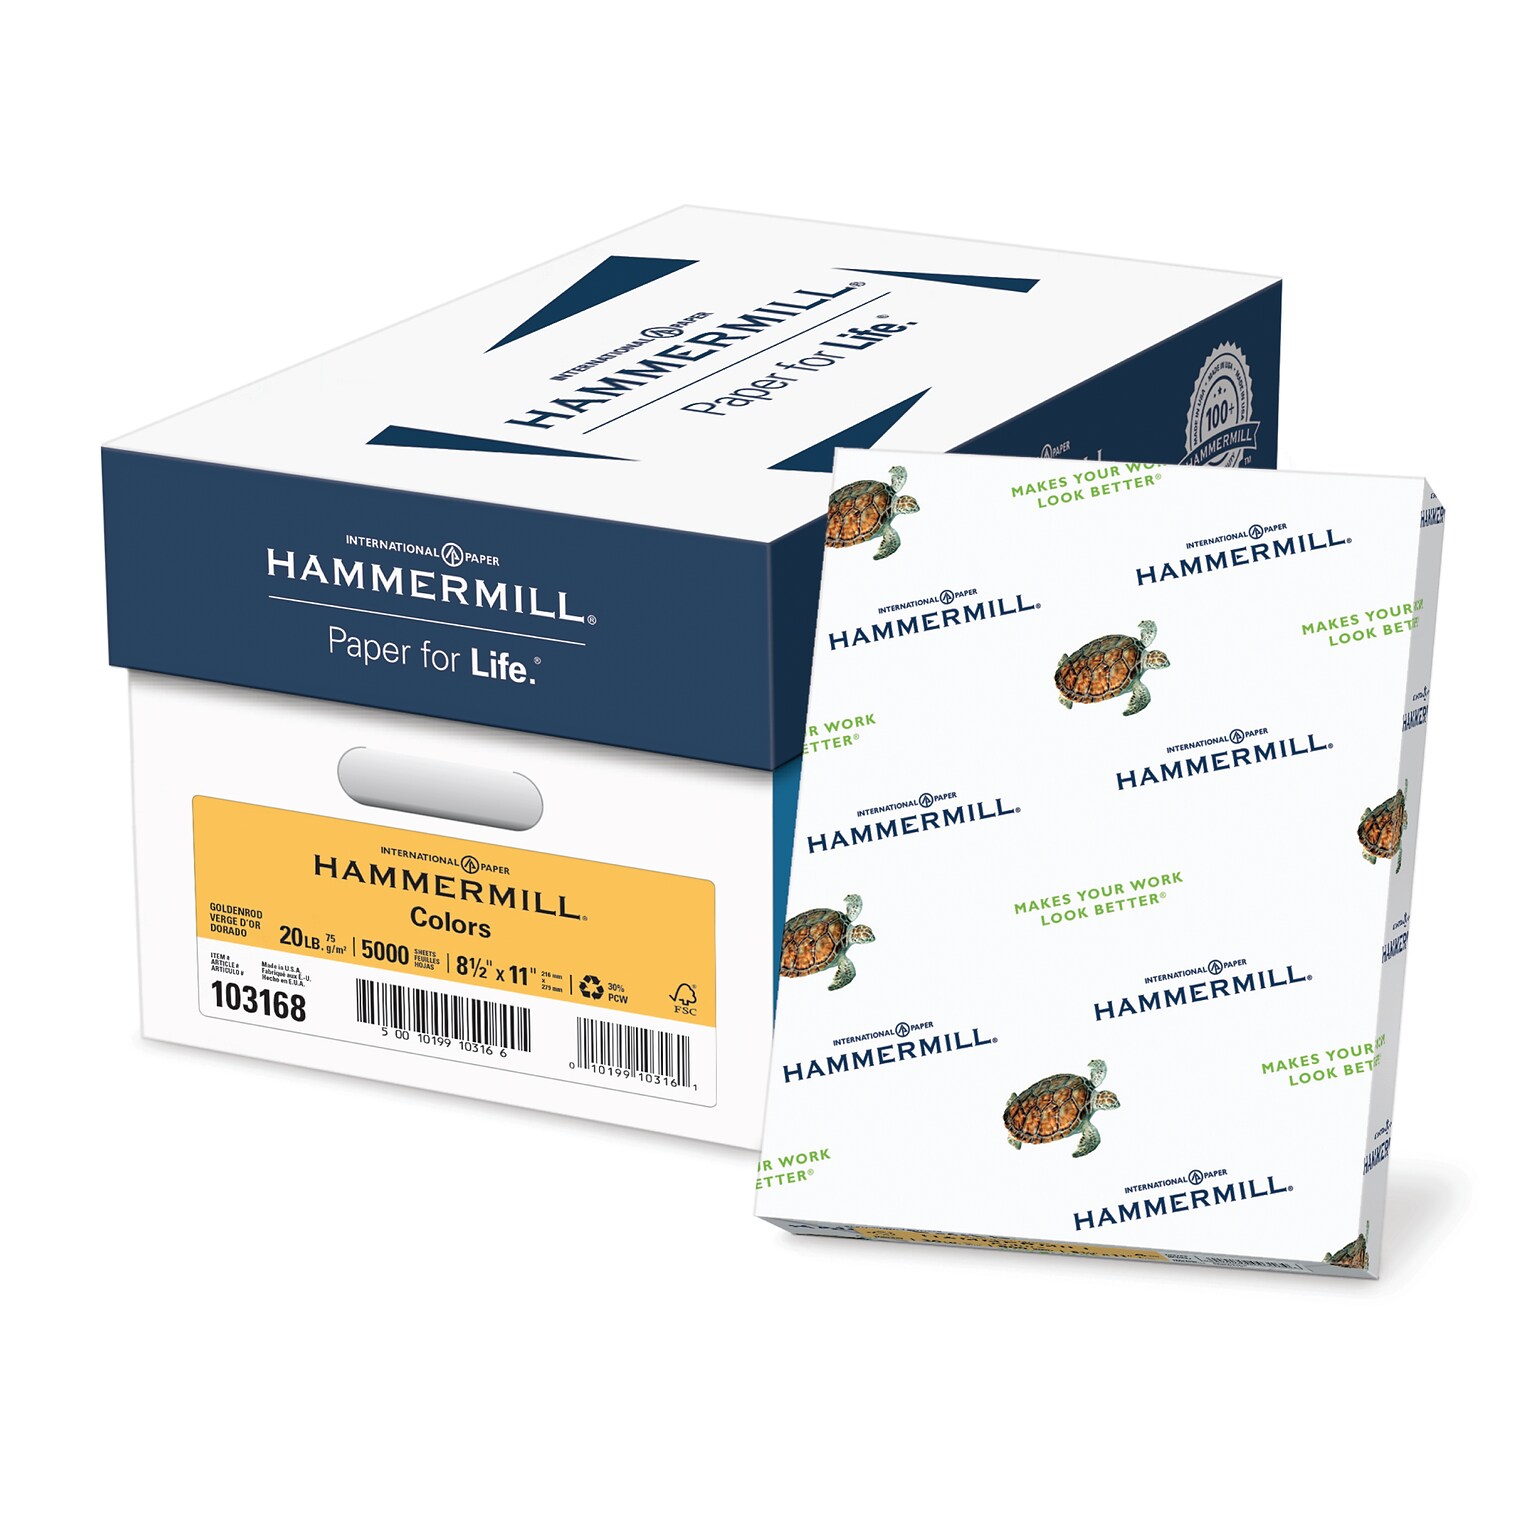 Hammermill Recycled Colors 8.5 x 11 Color Copy Paper, 20 lbs. Goldenrod, 5000 Sheets/Ream (103168CT)